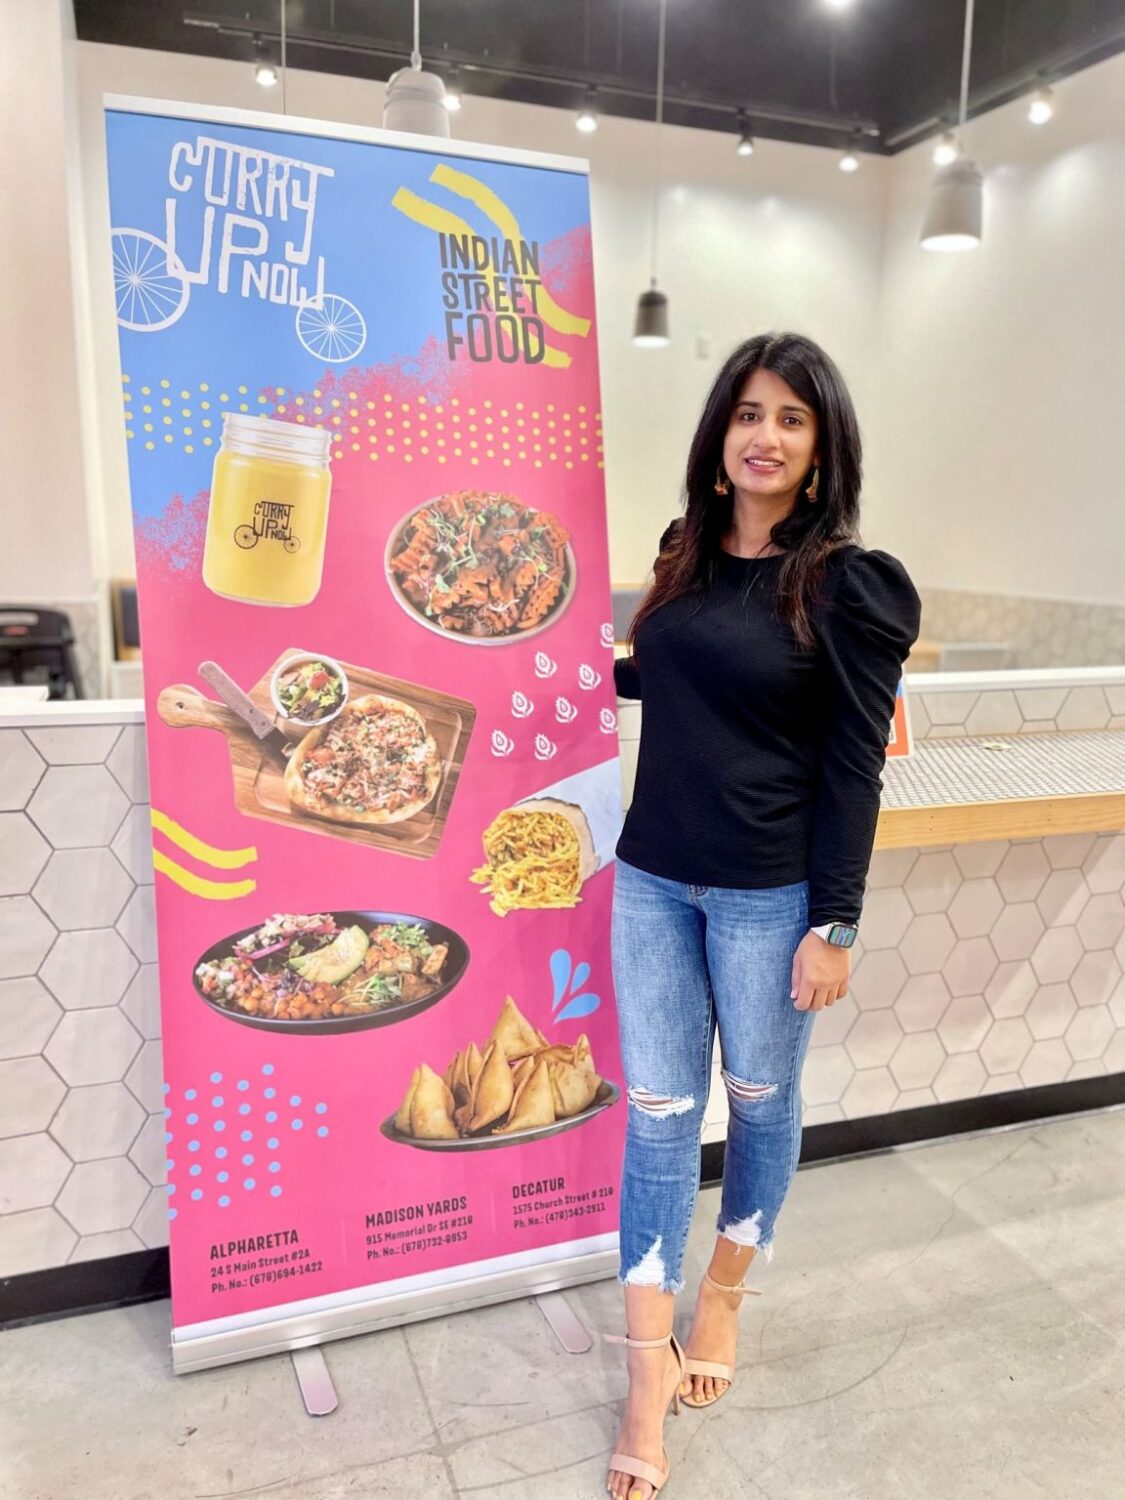 Curry Up Now Dominates Southern Expansion, Partners With Women-Owned Franchisee To Secure Third Franchise Deal in Texas